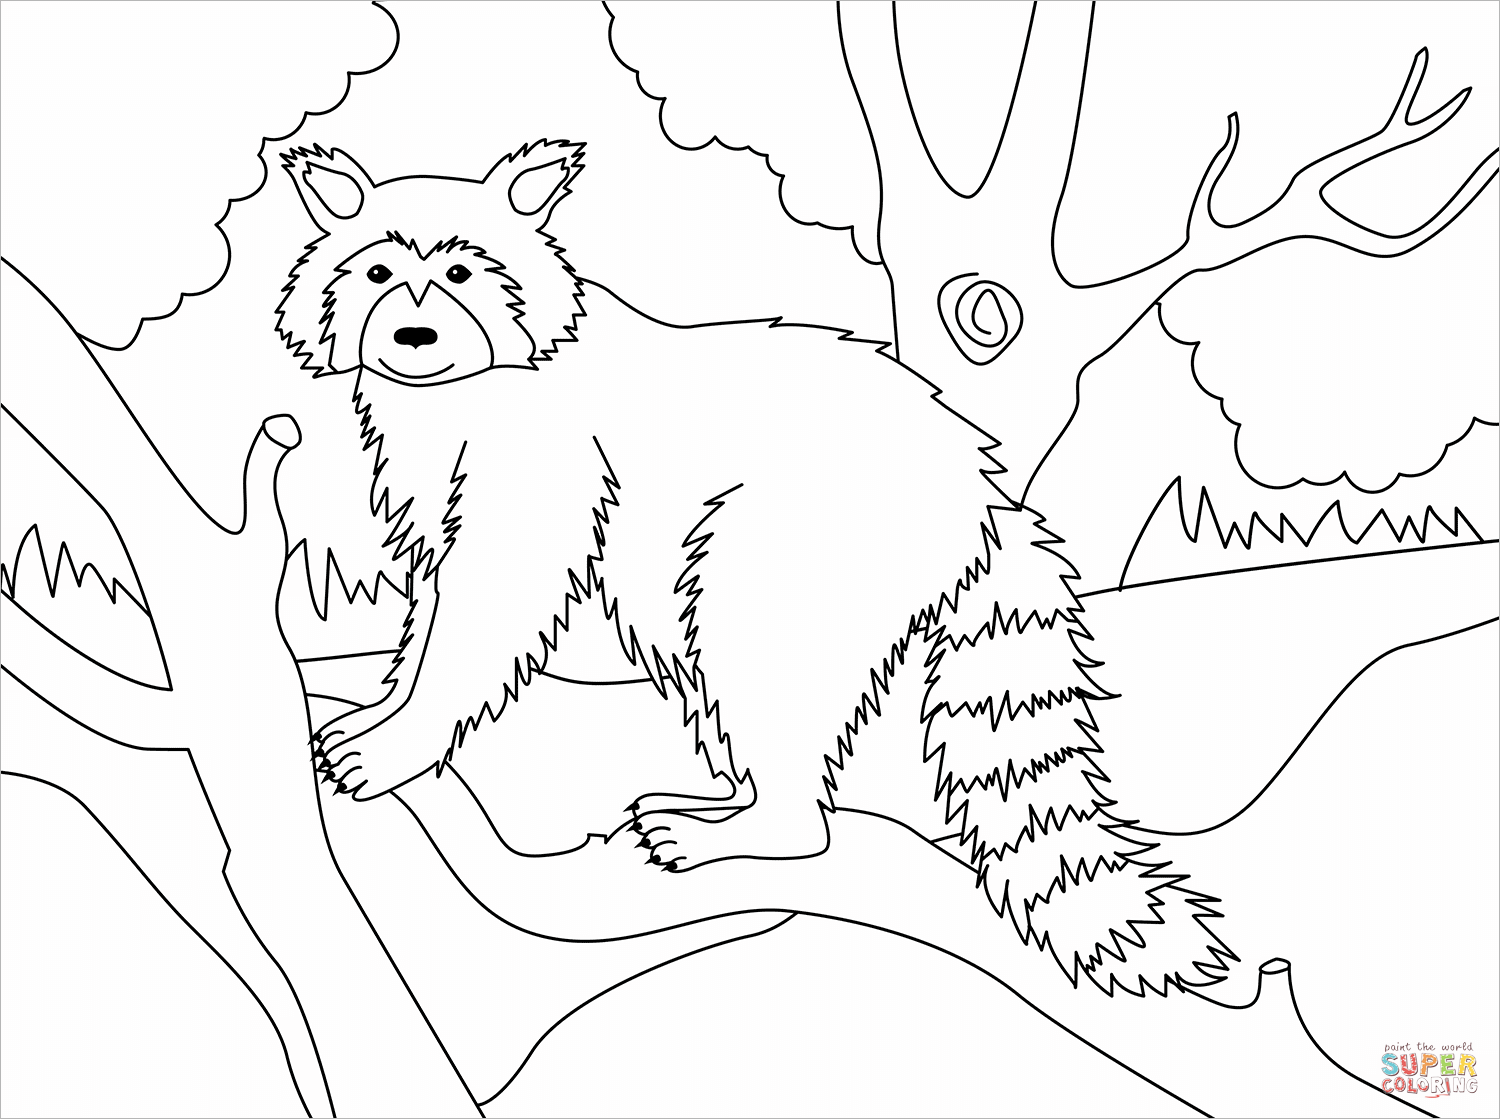 Racoon coloring page | Free Printable Coloring Pages